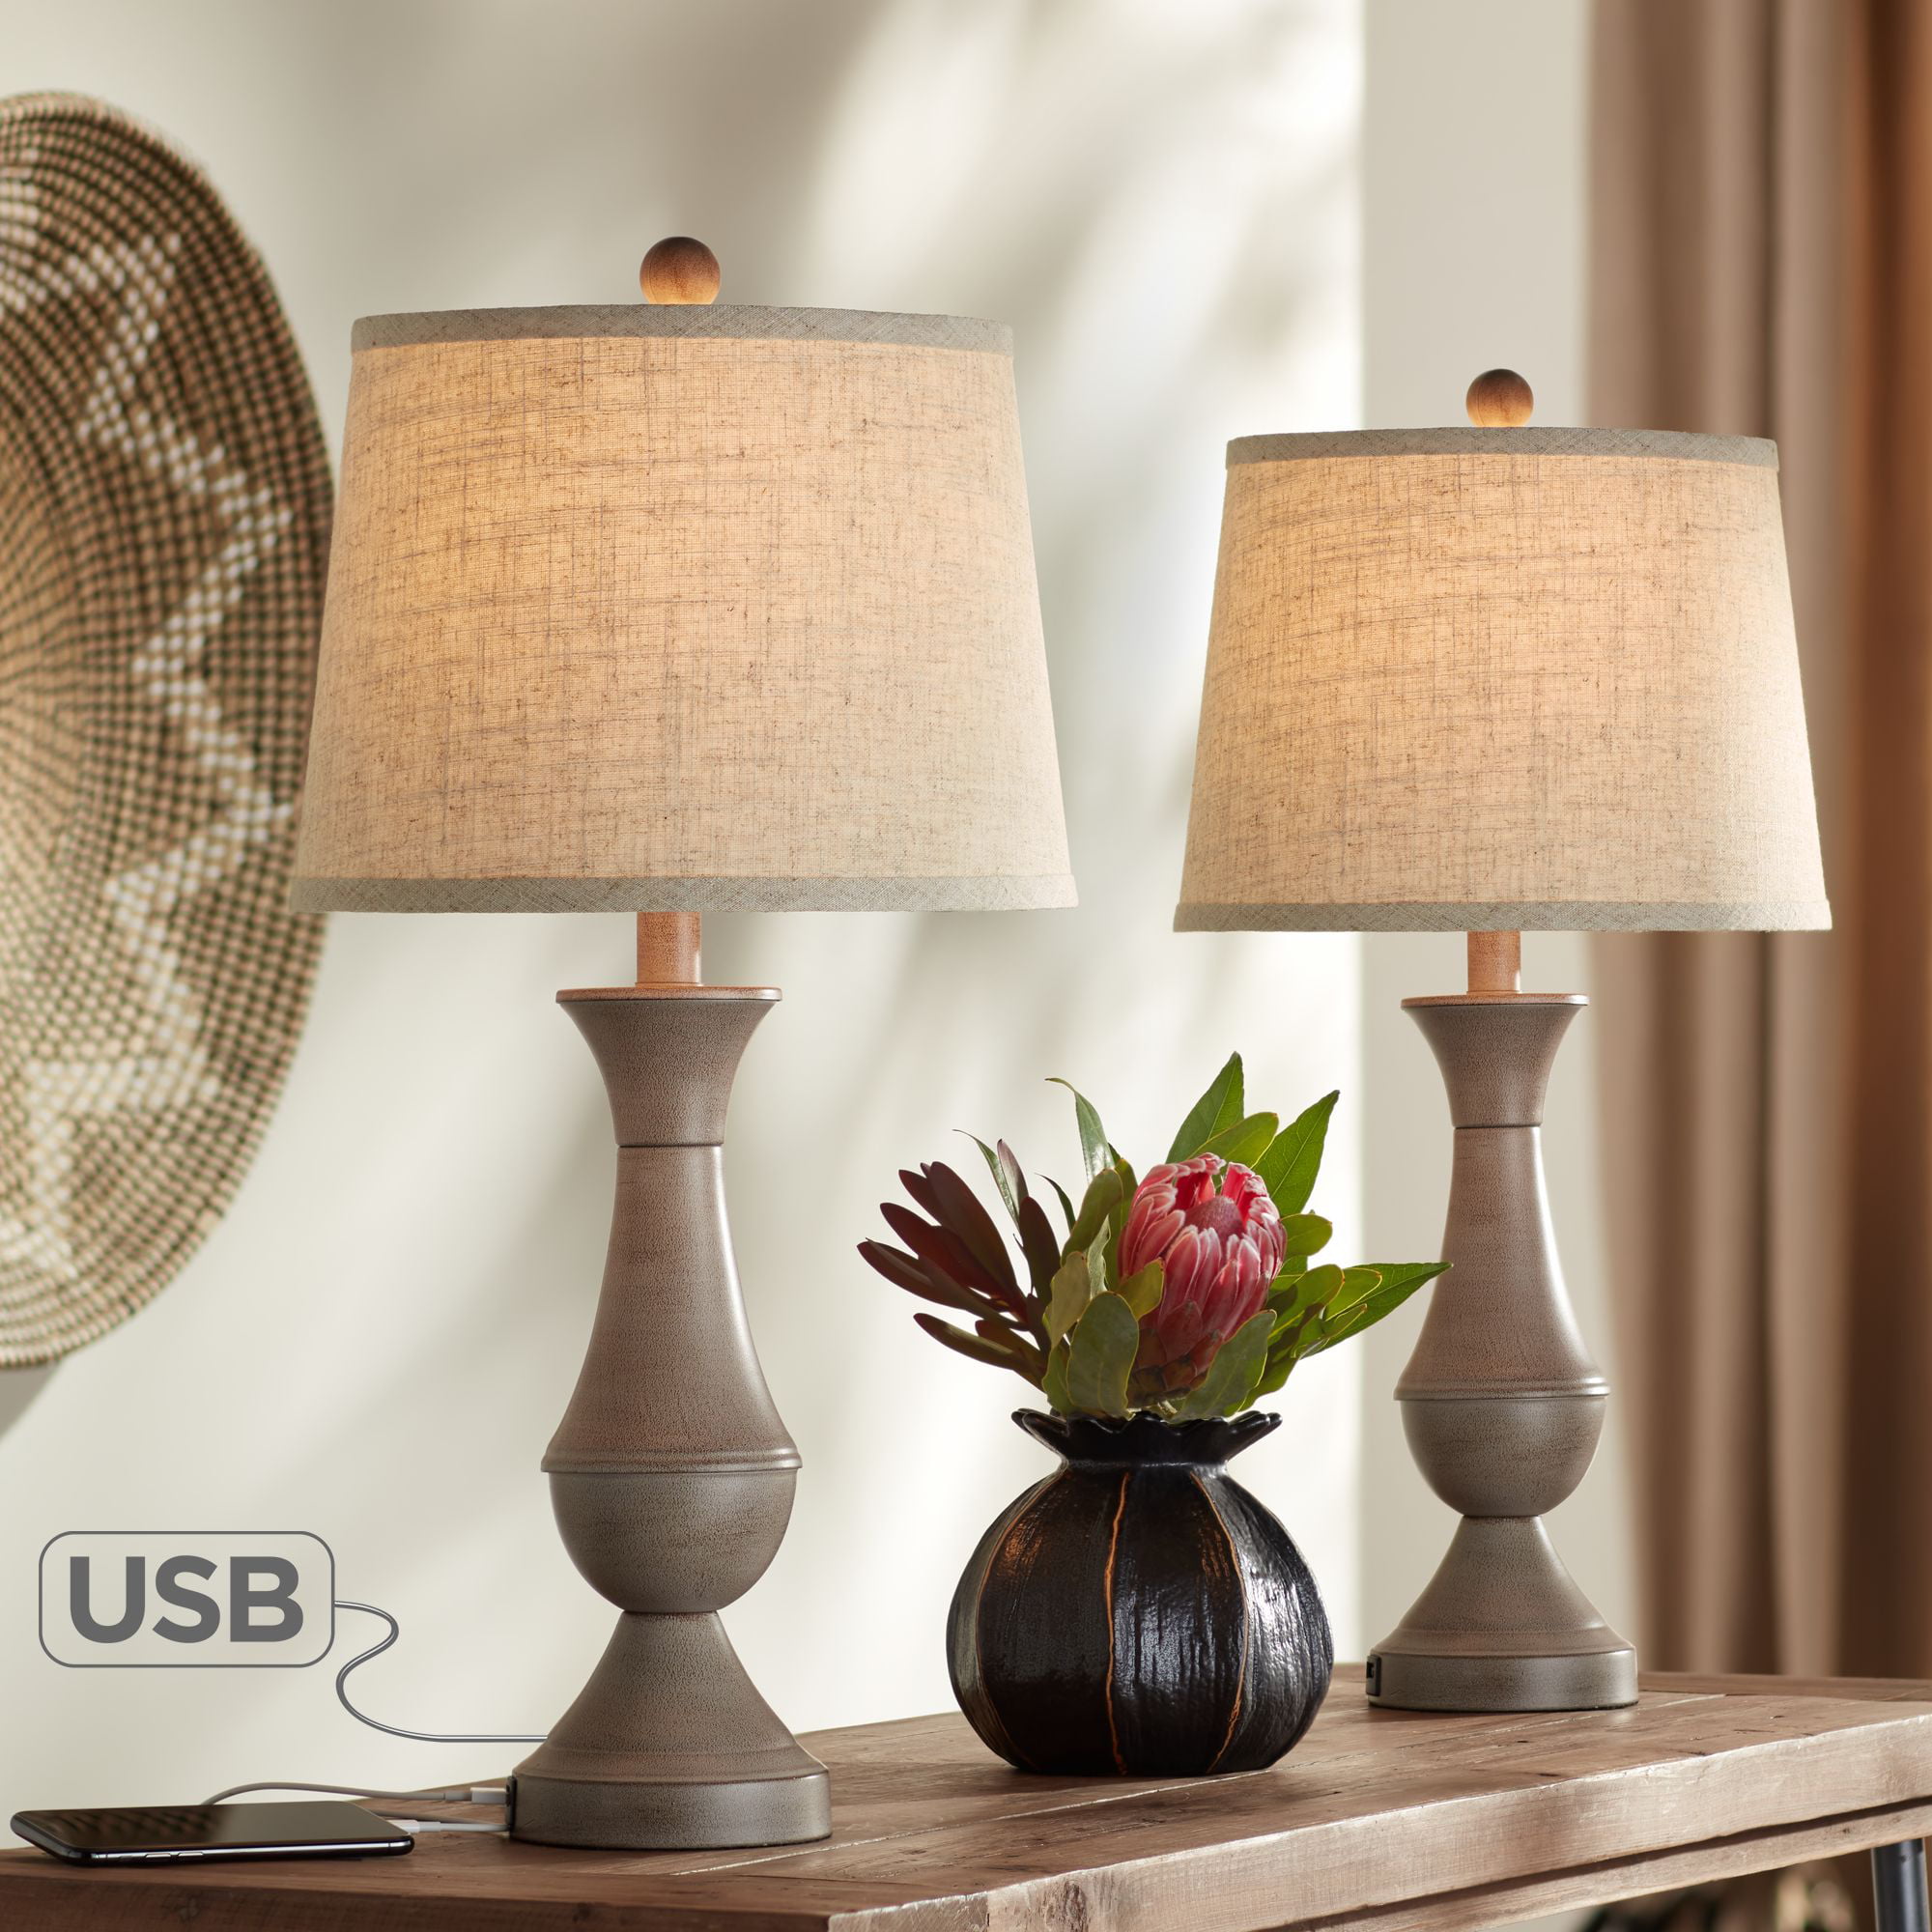 Regency Hill Traditional Table Lamps, Modern Traditional Table Lamps